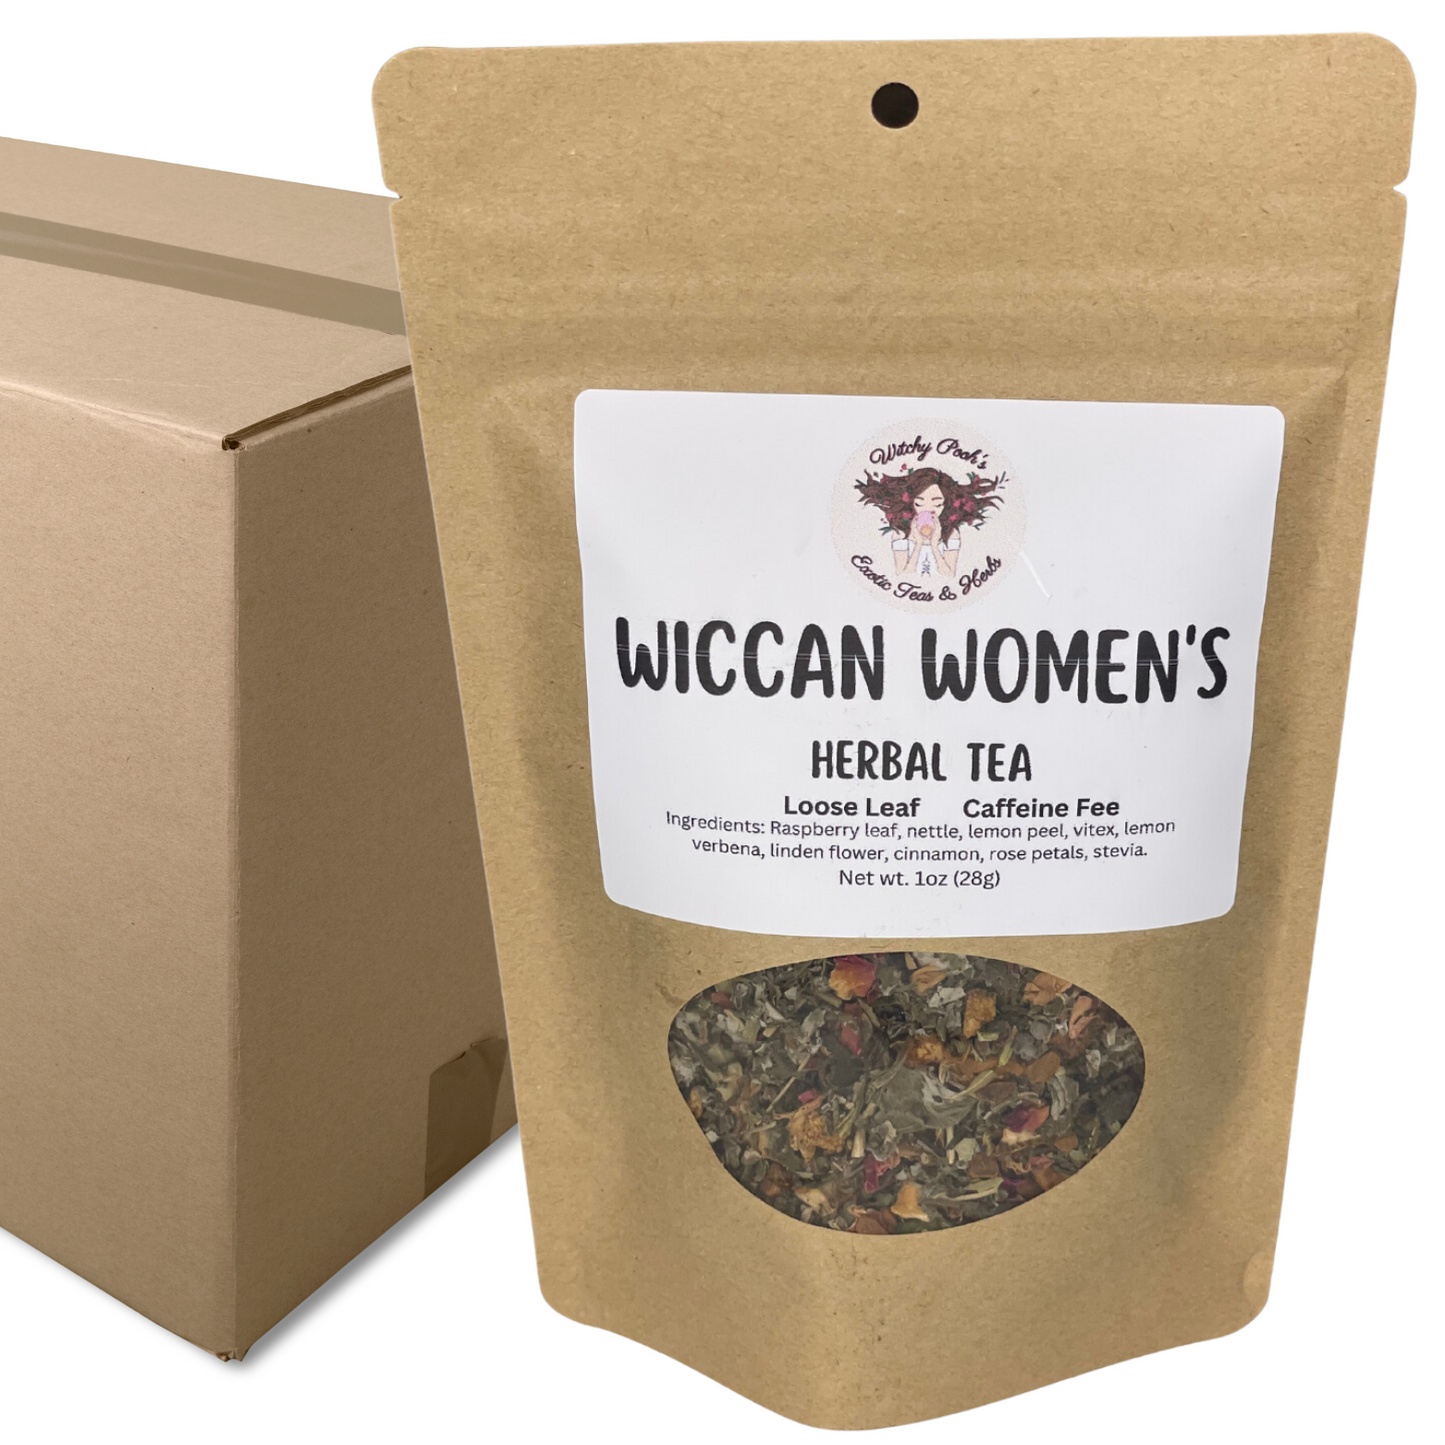 Witchy Pooh's Wiccan Women's Loose Leaf Herbal Tea, Caffeine Free